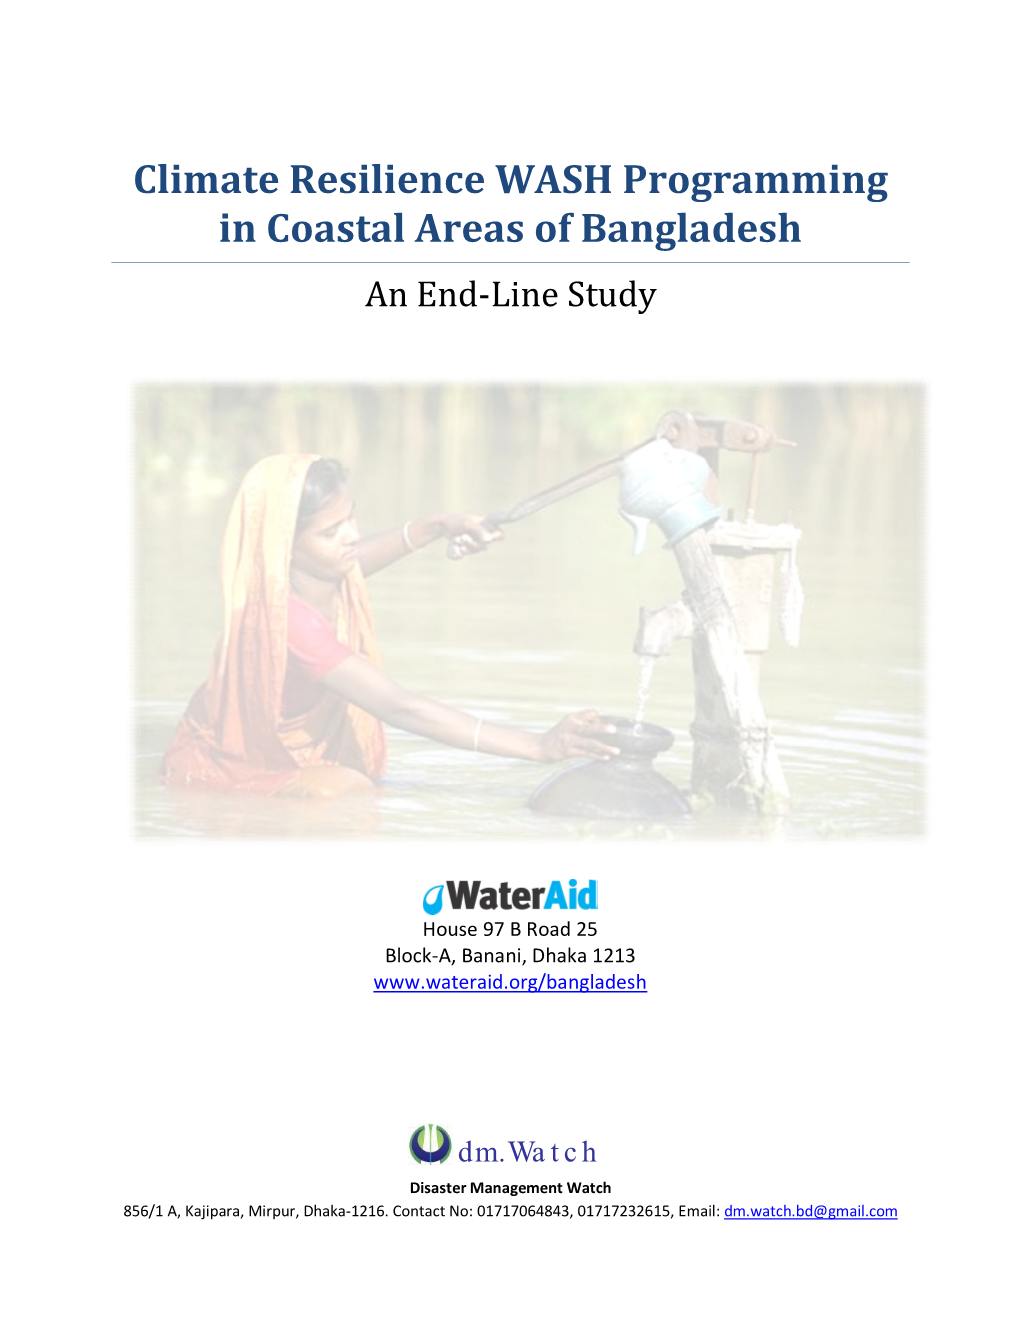 Climate Resilience WASH Programming in Coastal Areas of Bangladesh an End-Line Study